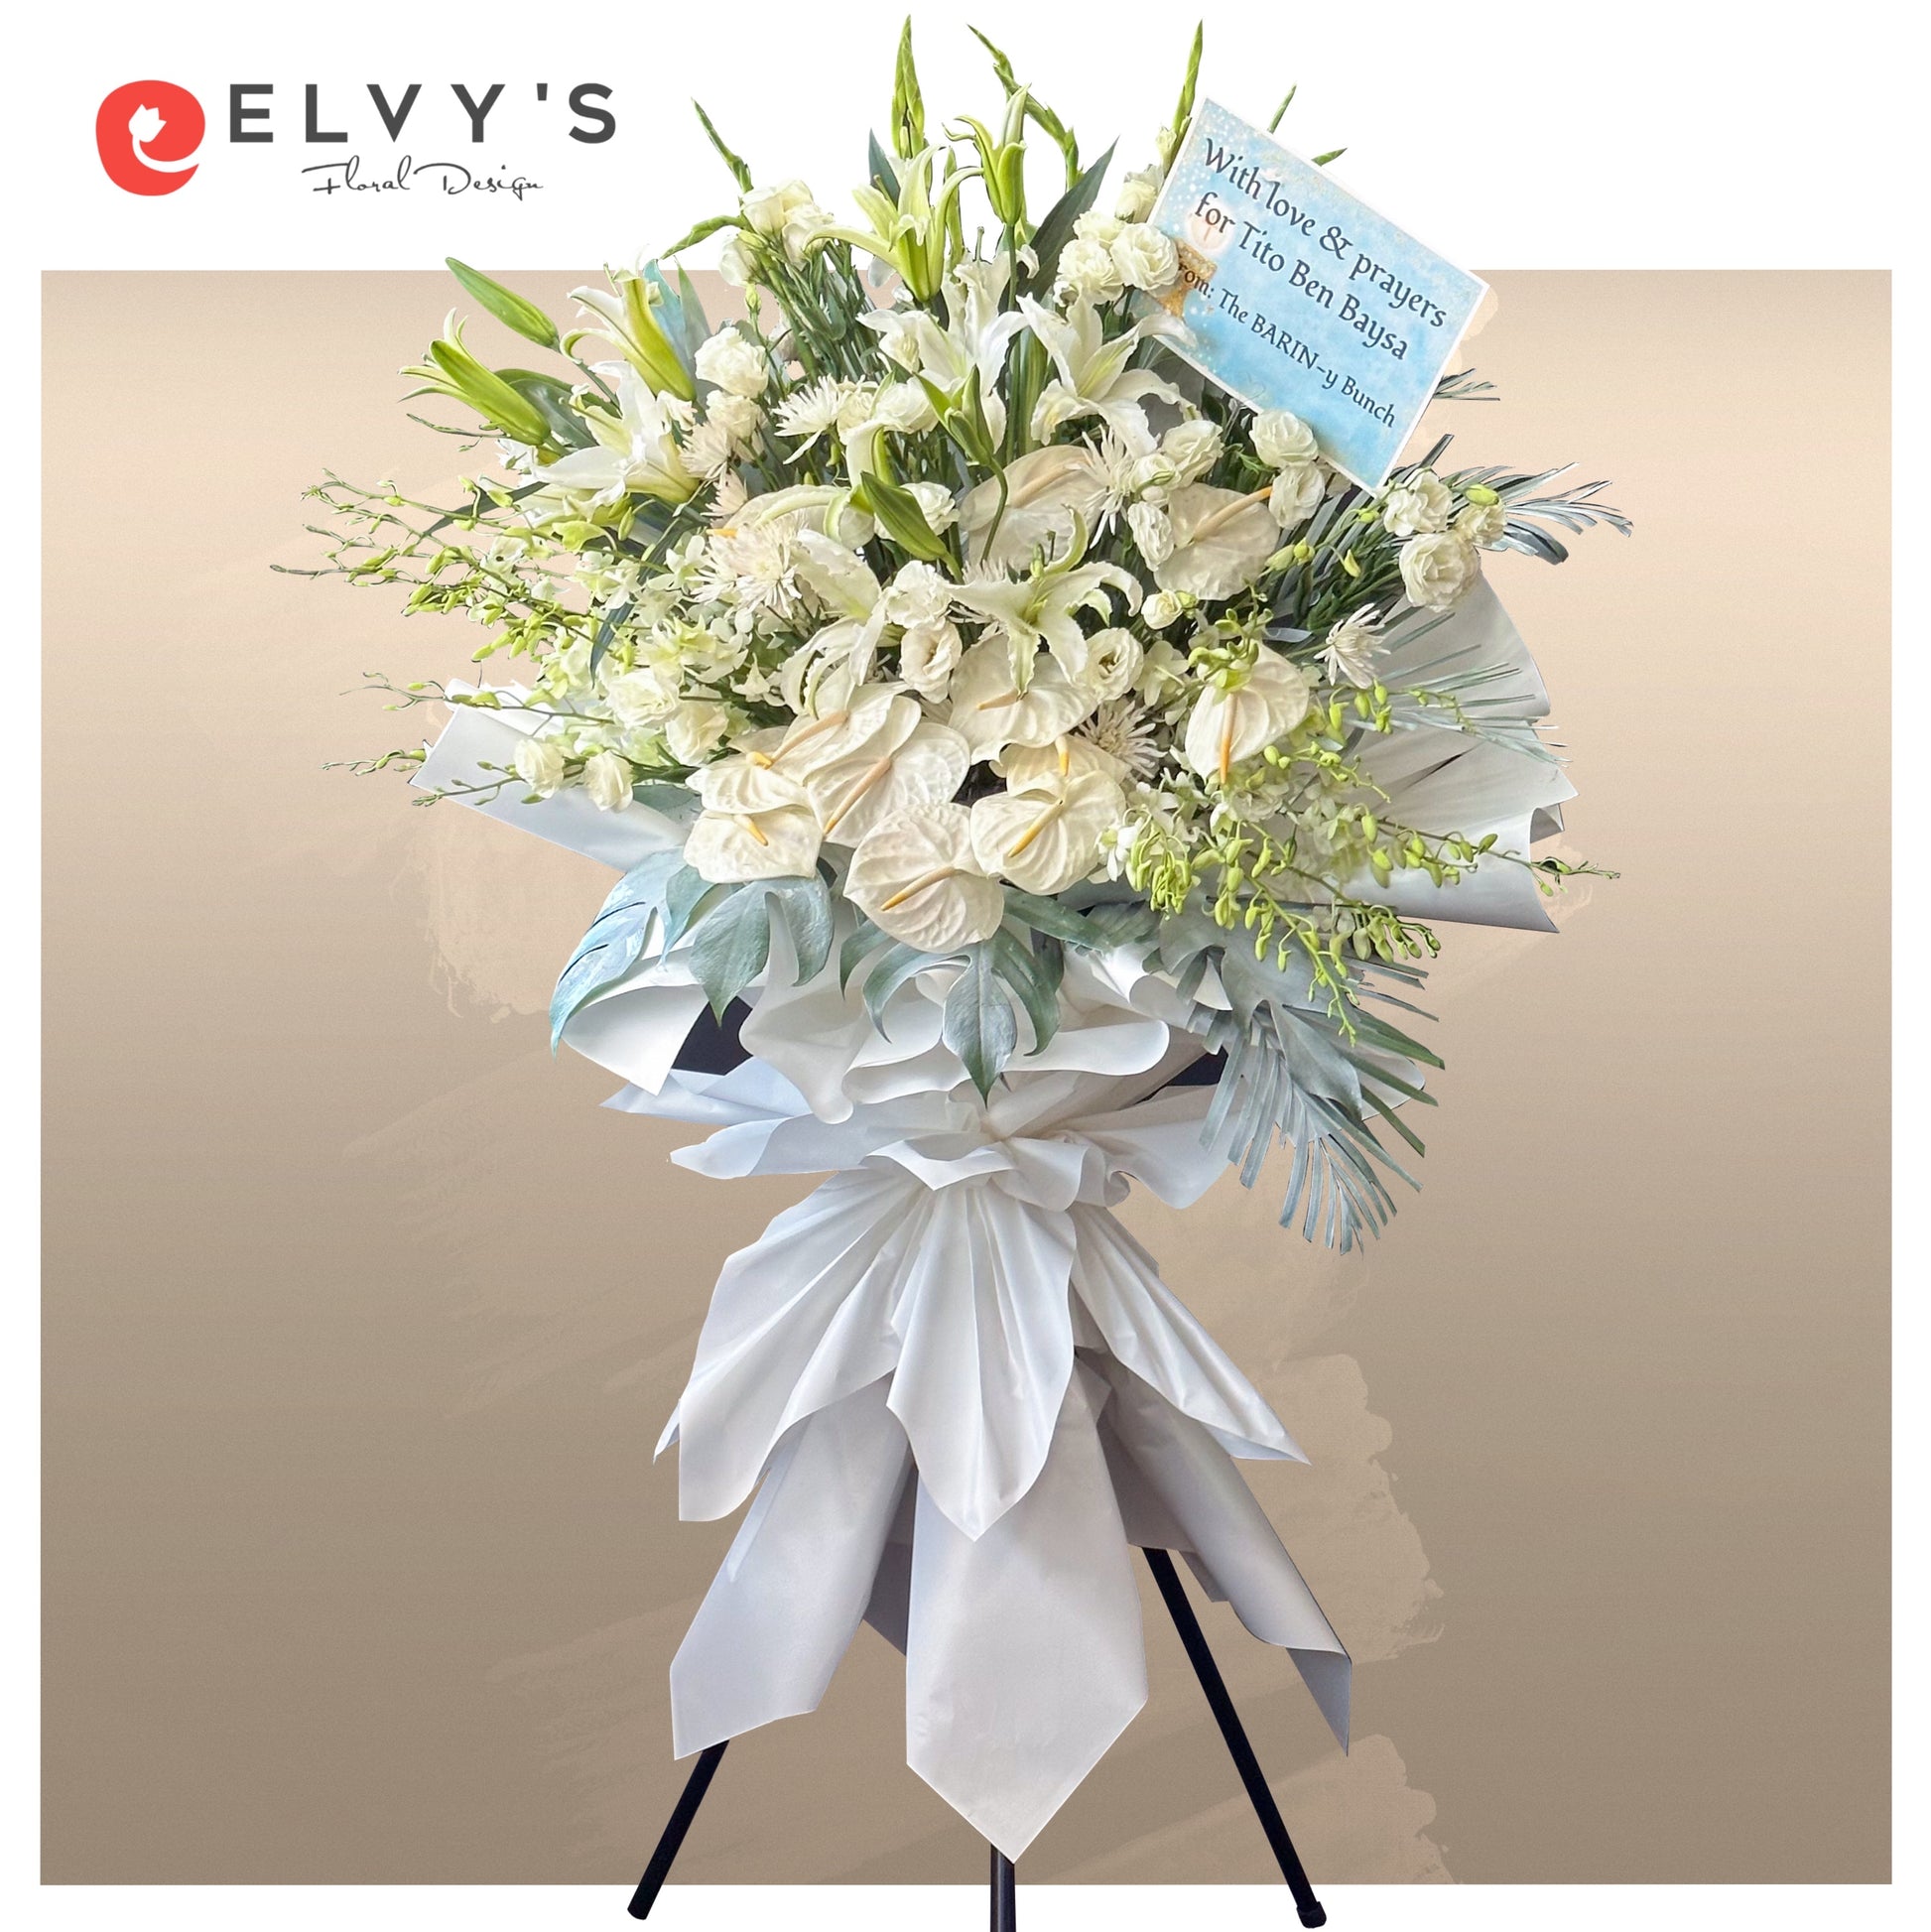 Majestic White Flower Stand | Elvy's Floral Design